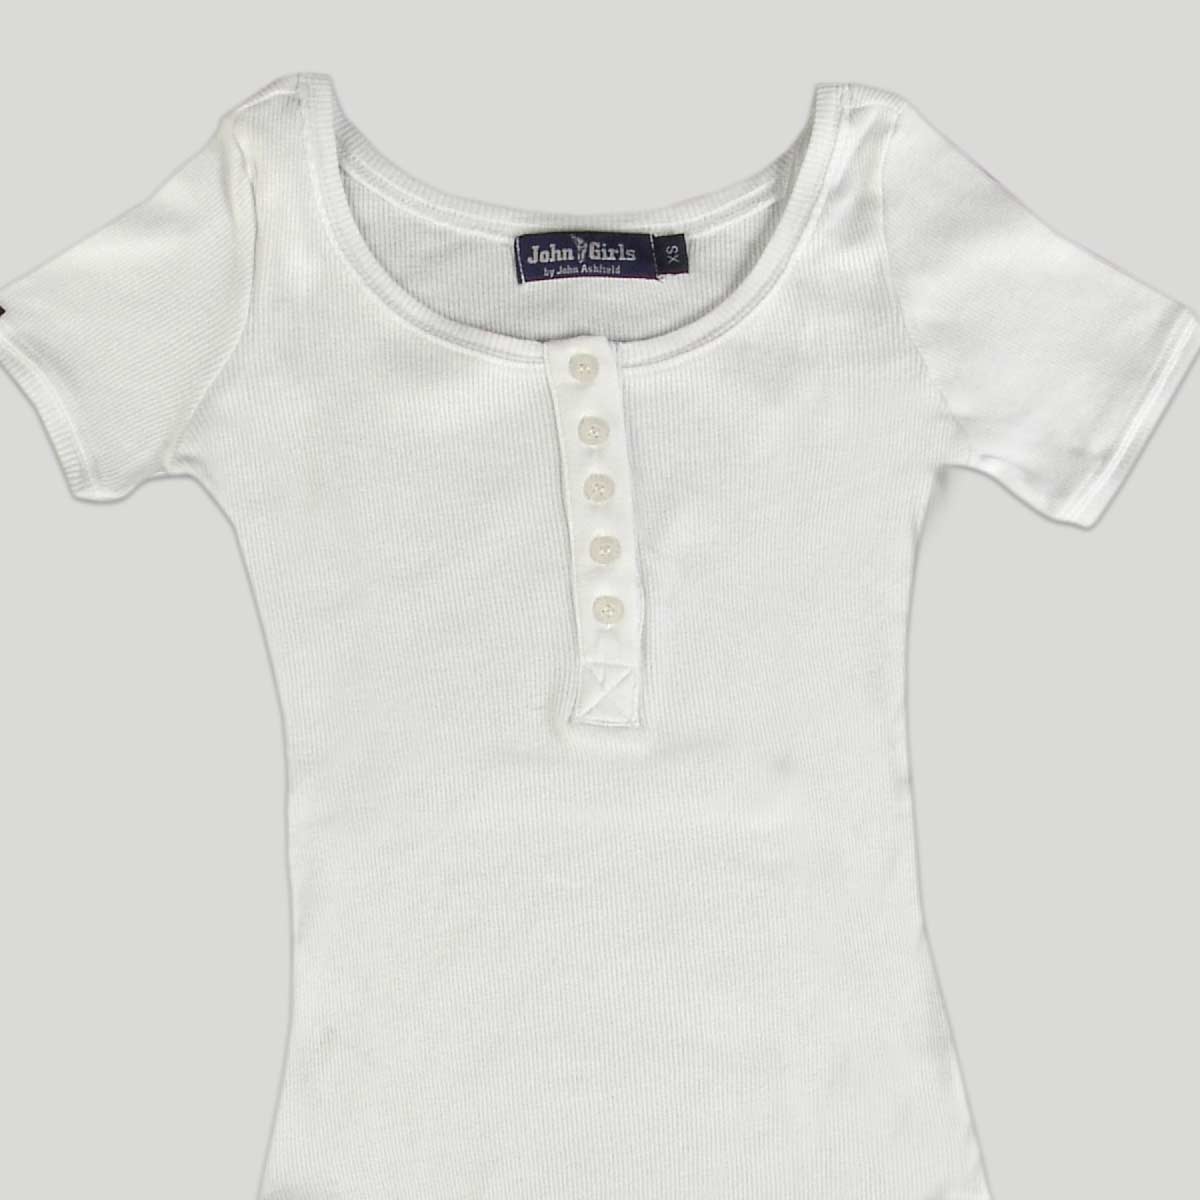 Women's Body with short sleeve and buttons